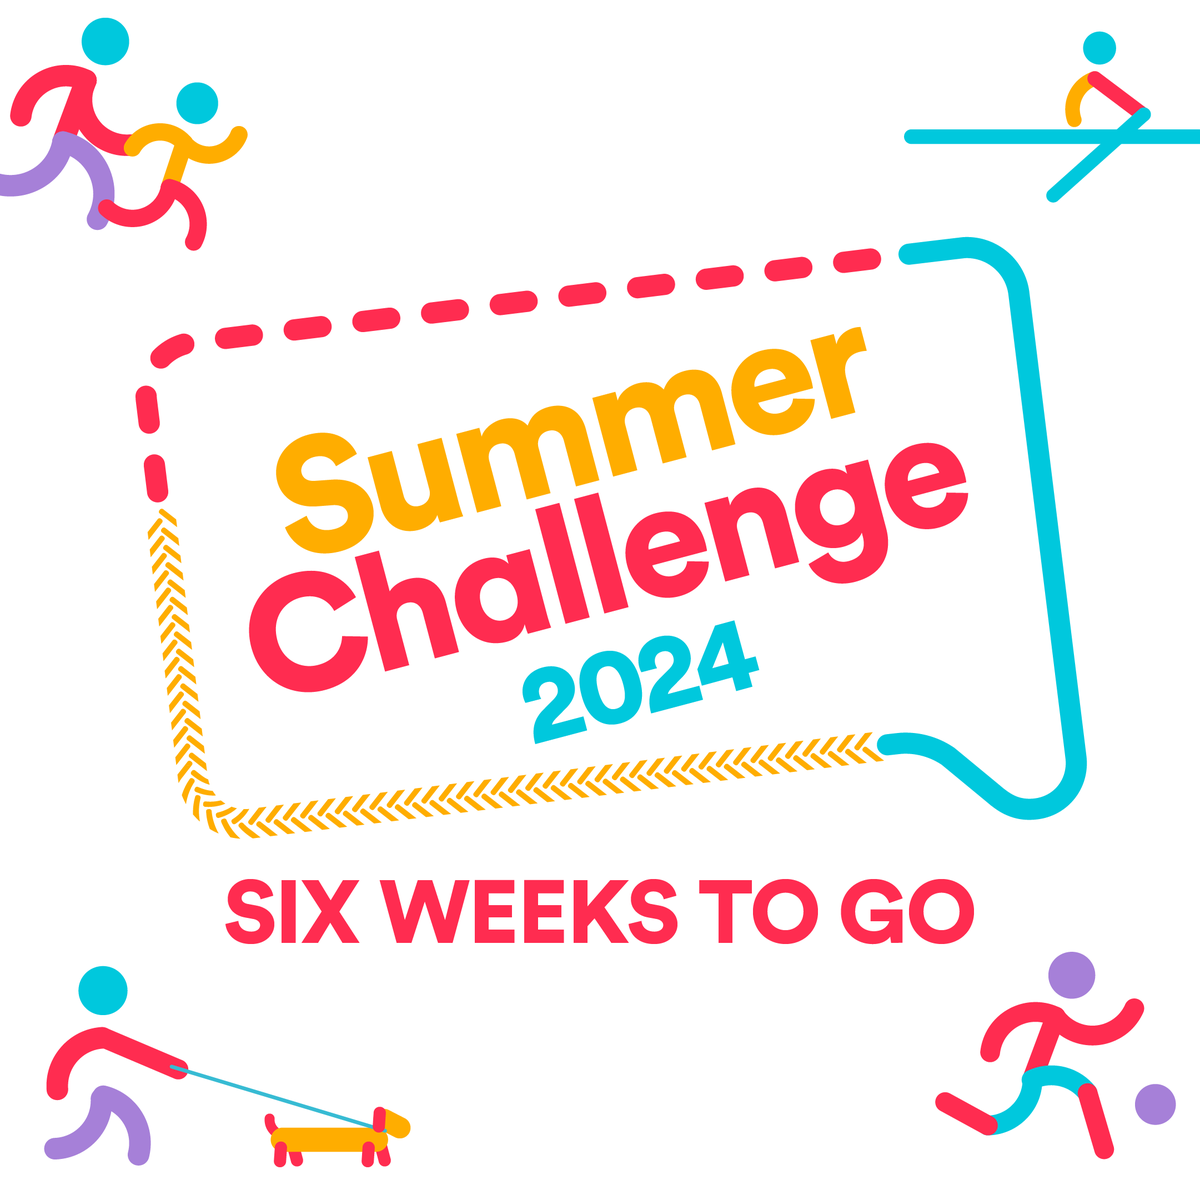 Our Summer Challenge is in just SIX weeks! Gather your team for an uplifting opportunity to motivate, bond, and engage in healthy inclusive competition while pulling together for a common cause. Register to take part: ow.ly/EeBC50Roqtl